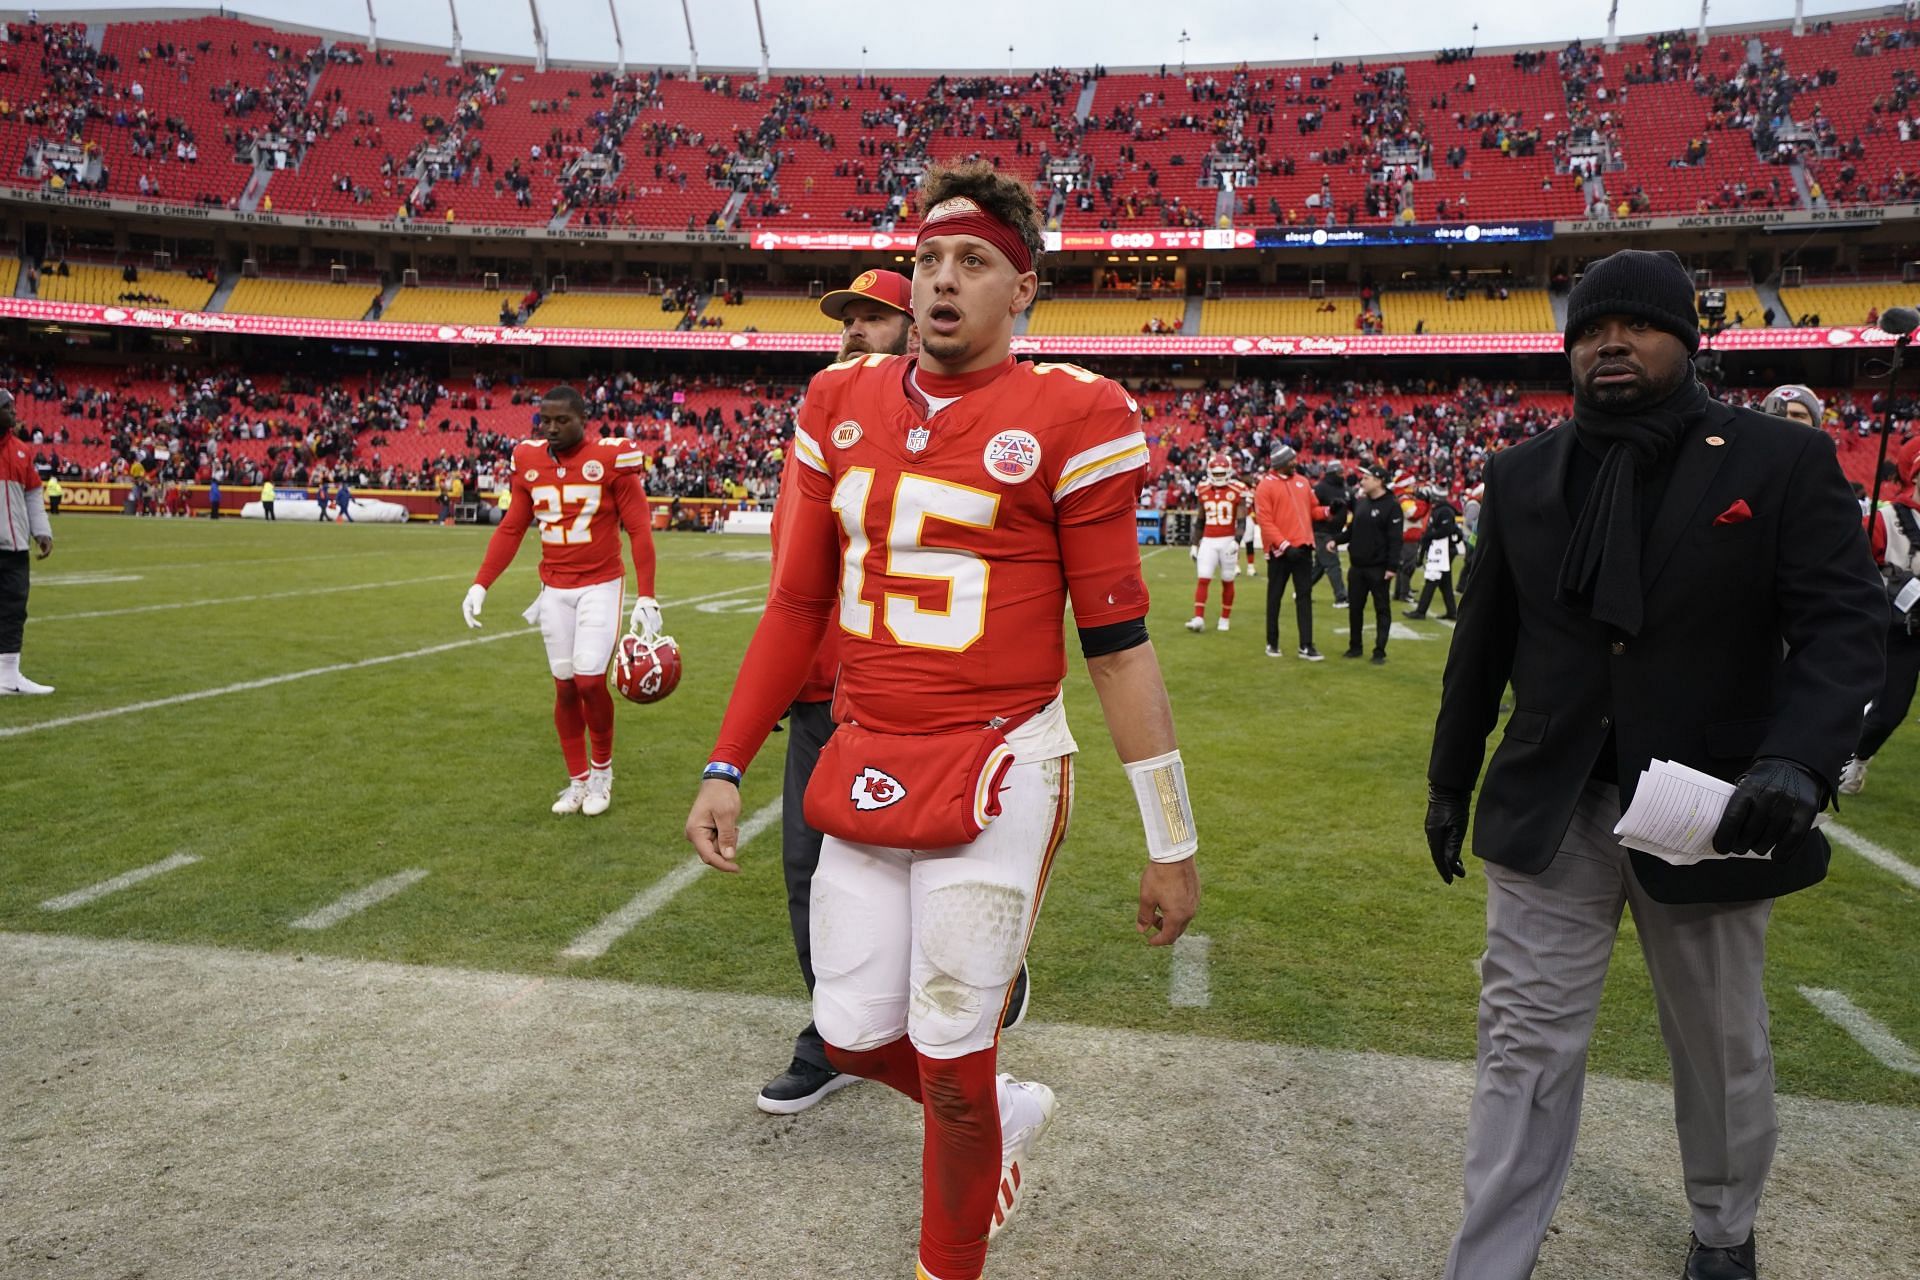 The Patrick Mahomes Chiefs are struggling